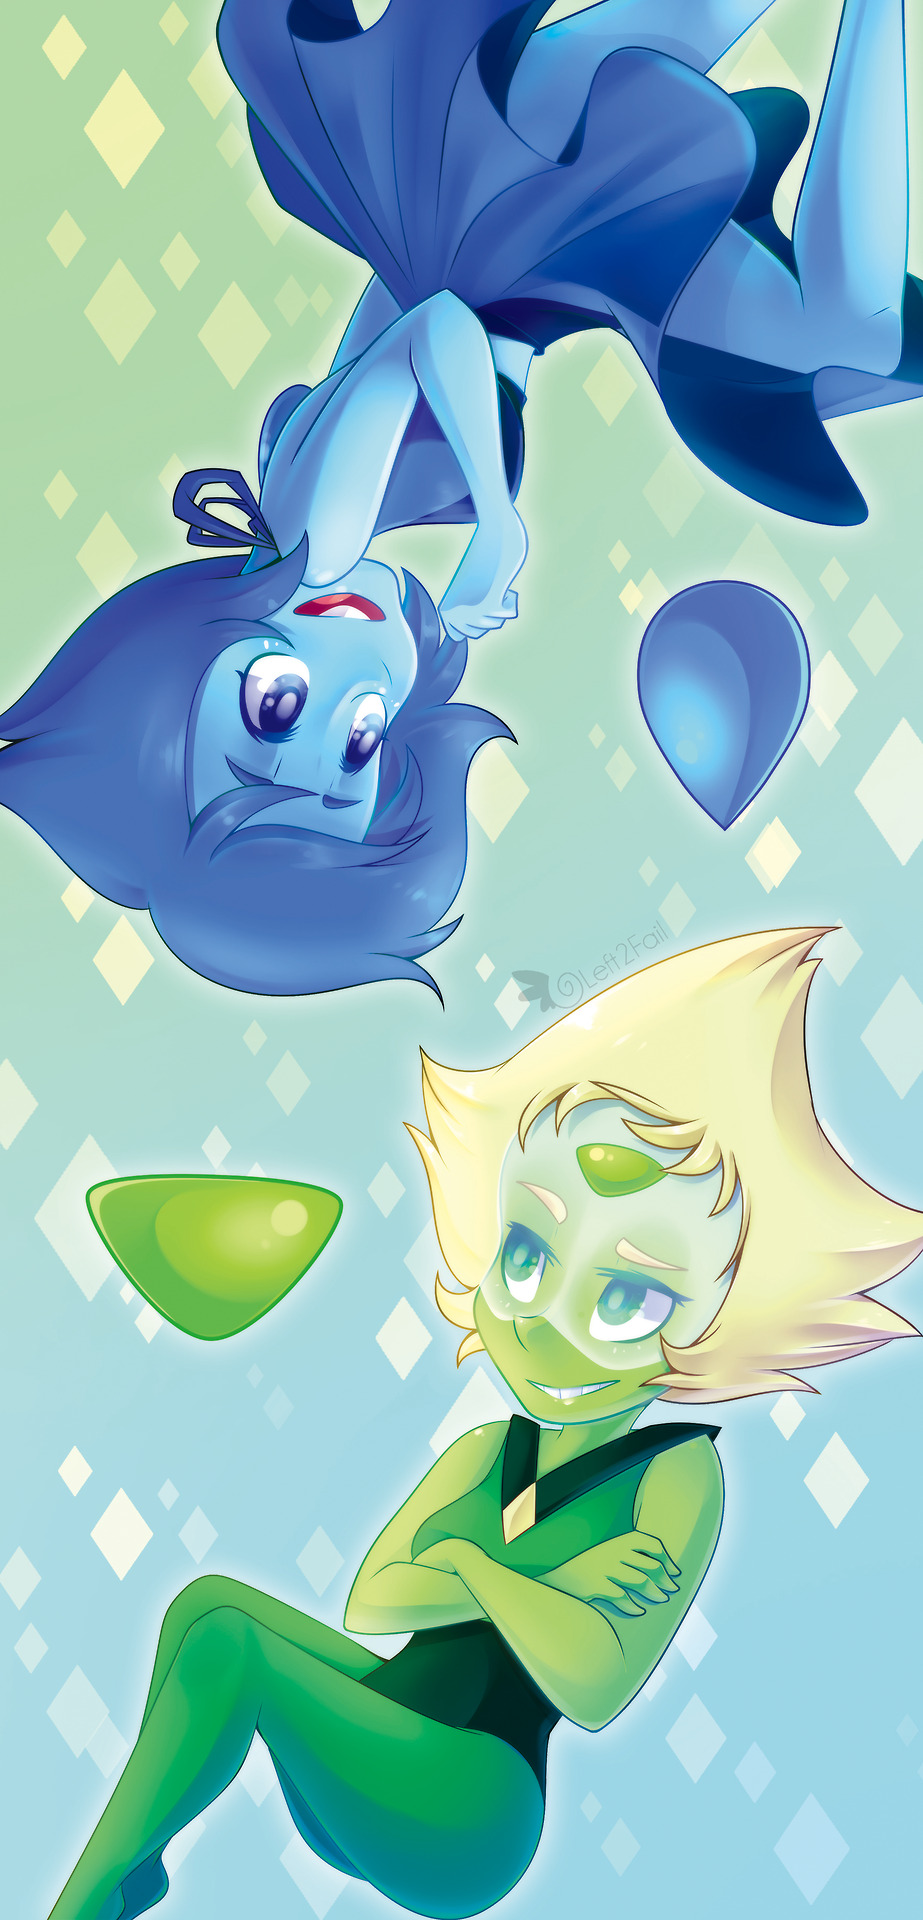 Lapis + Peridot Bookmark c: Will be specially printed which I’ll show when the time comes ;D (colors may look off since it had to be CMYK and I worked on it in RGB. oops) Redbubble